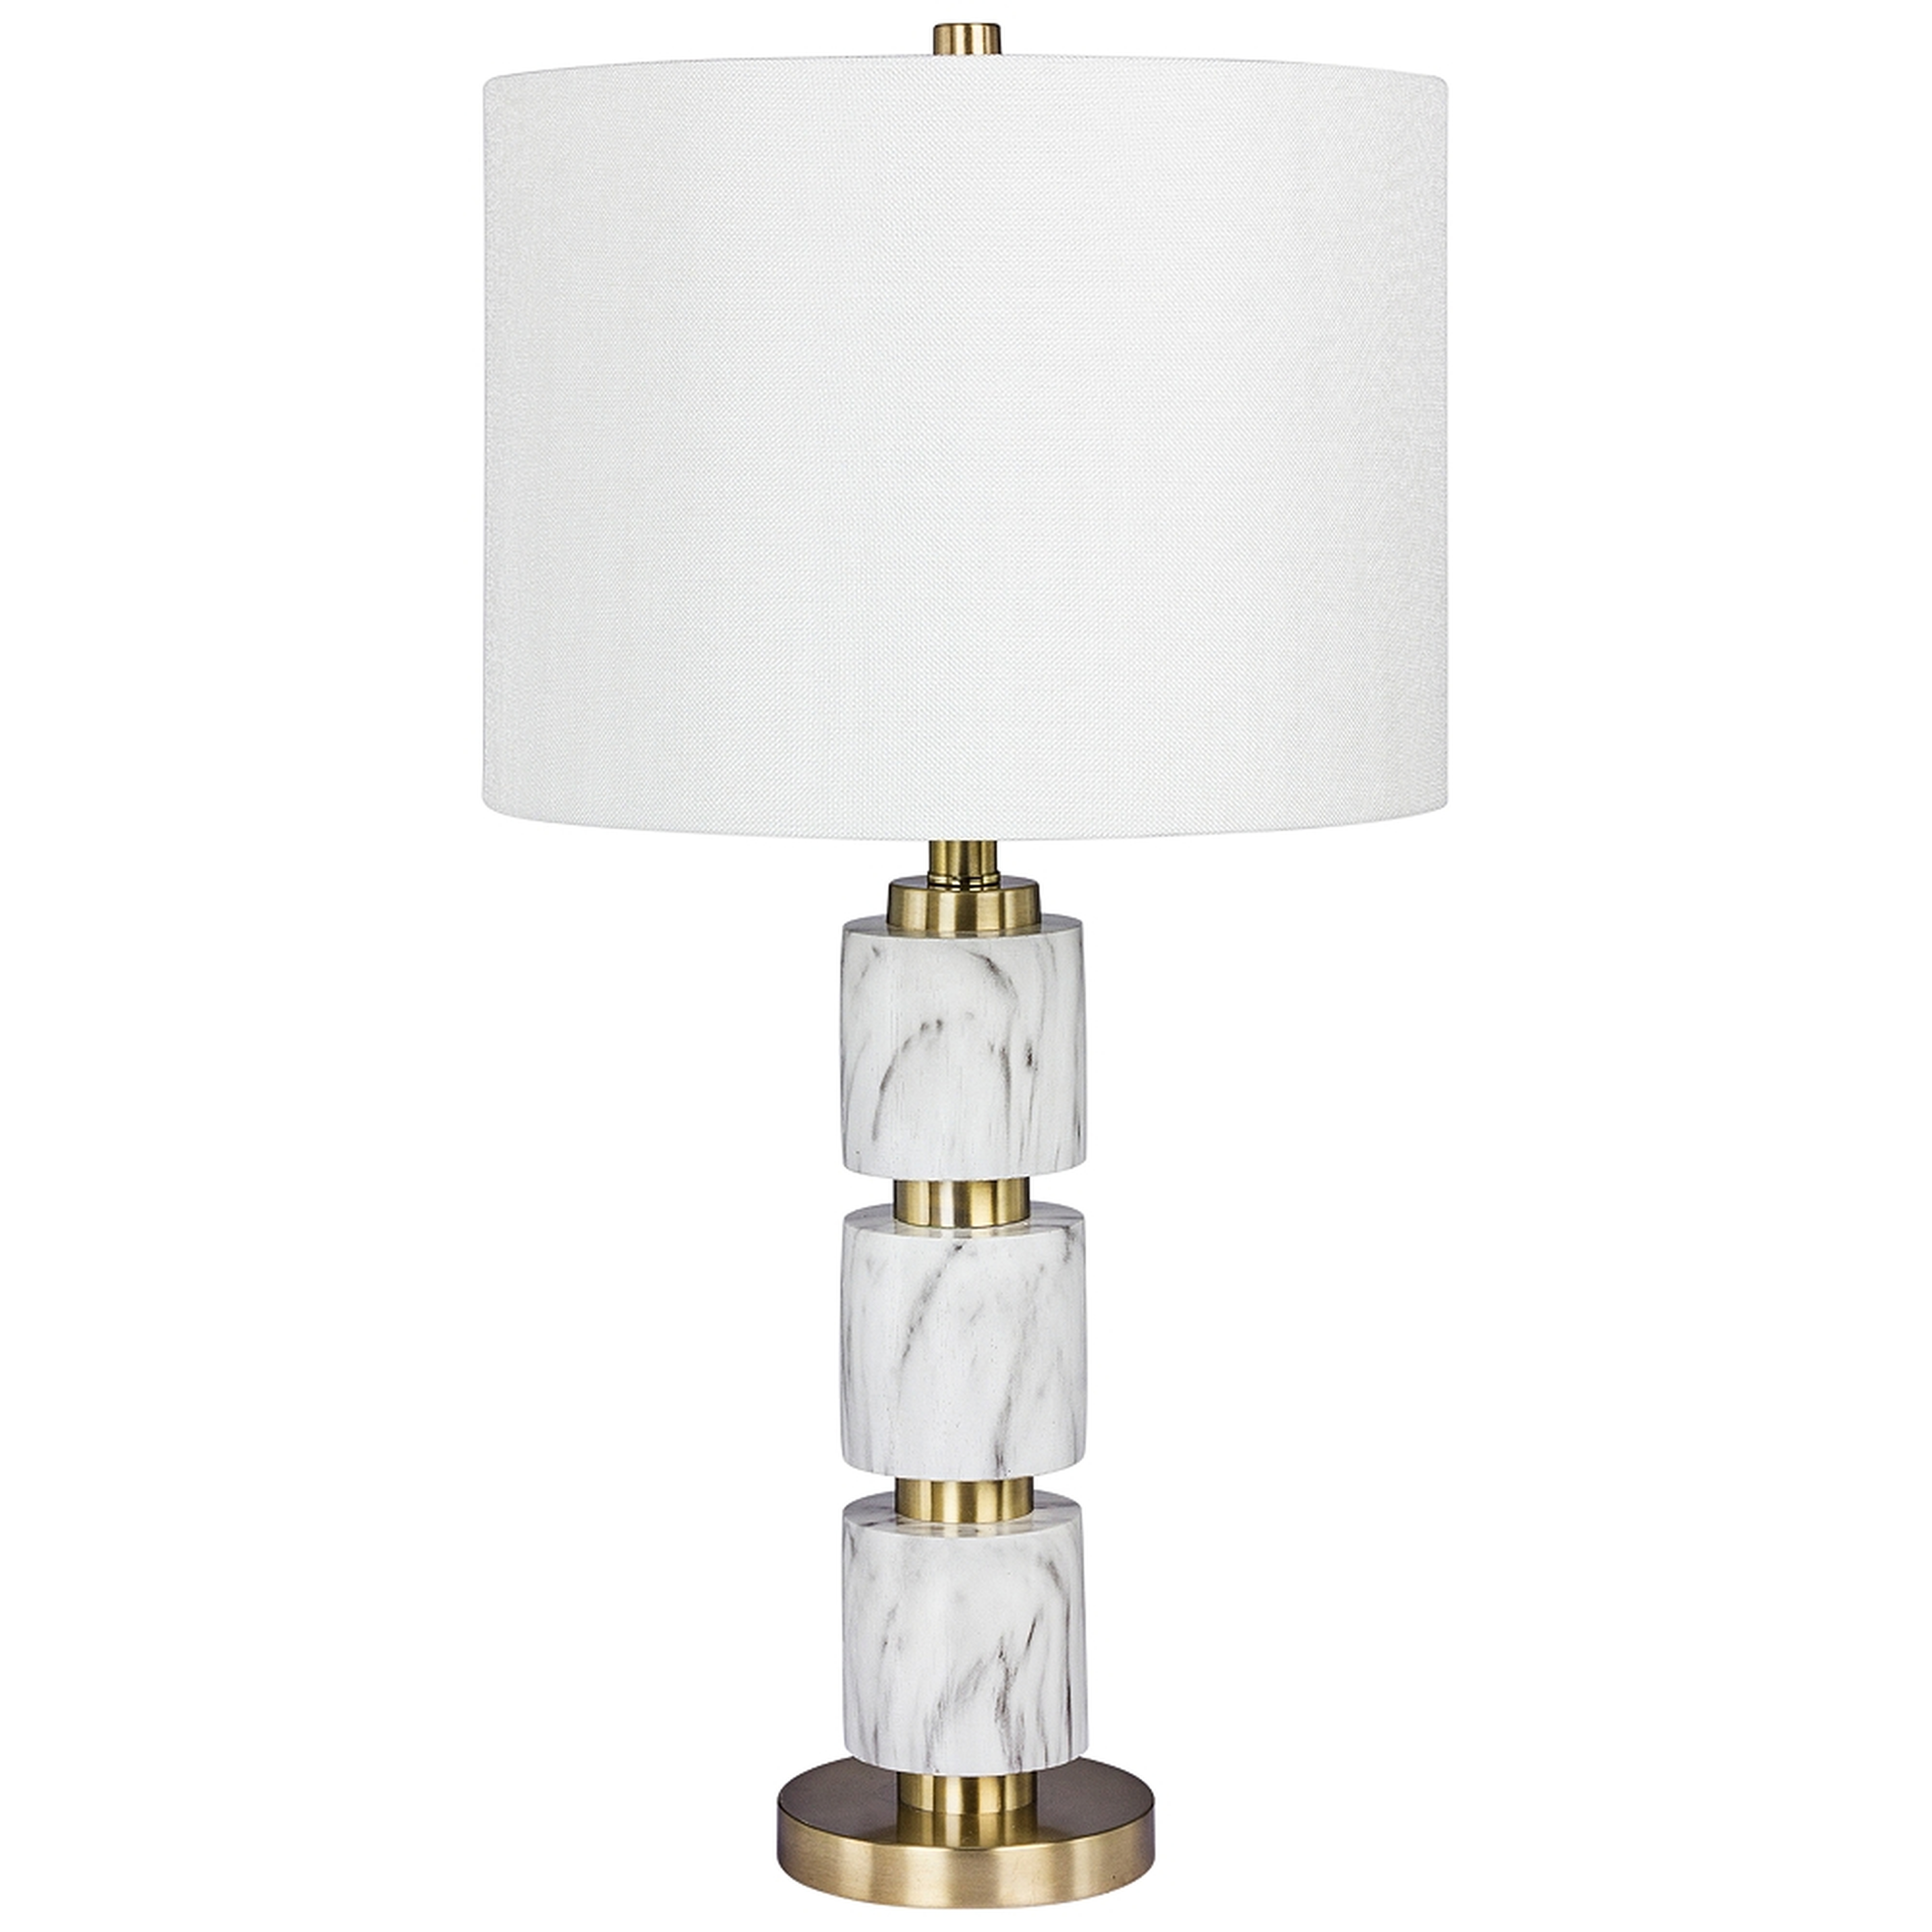 Rowland White Faux Marble w/ Satin Brass Stacked Table Lamp - Style # 37P51 - Lamps Plus